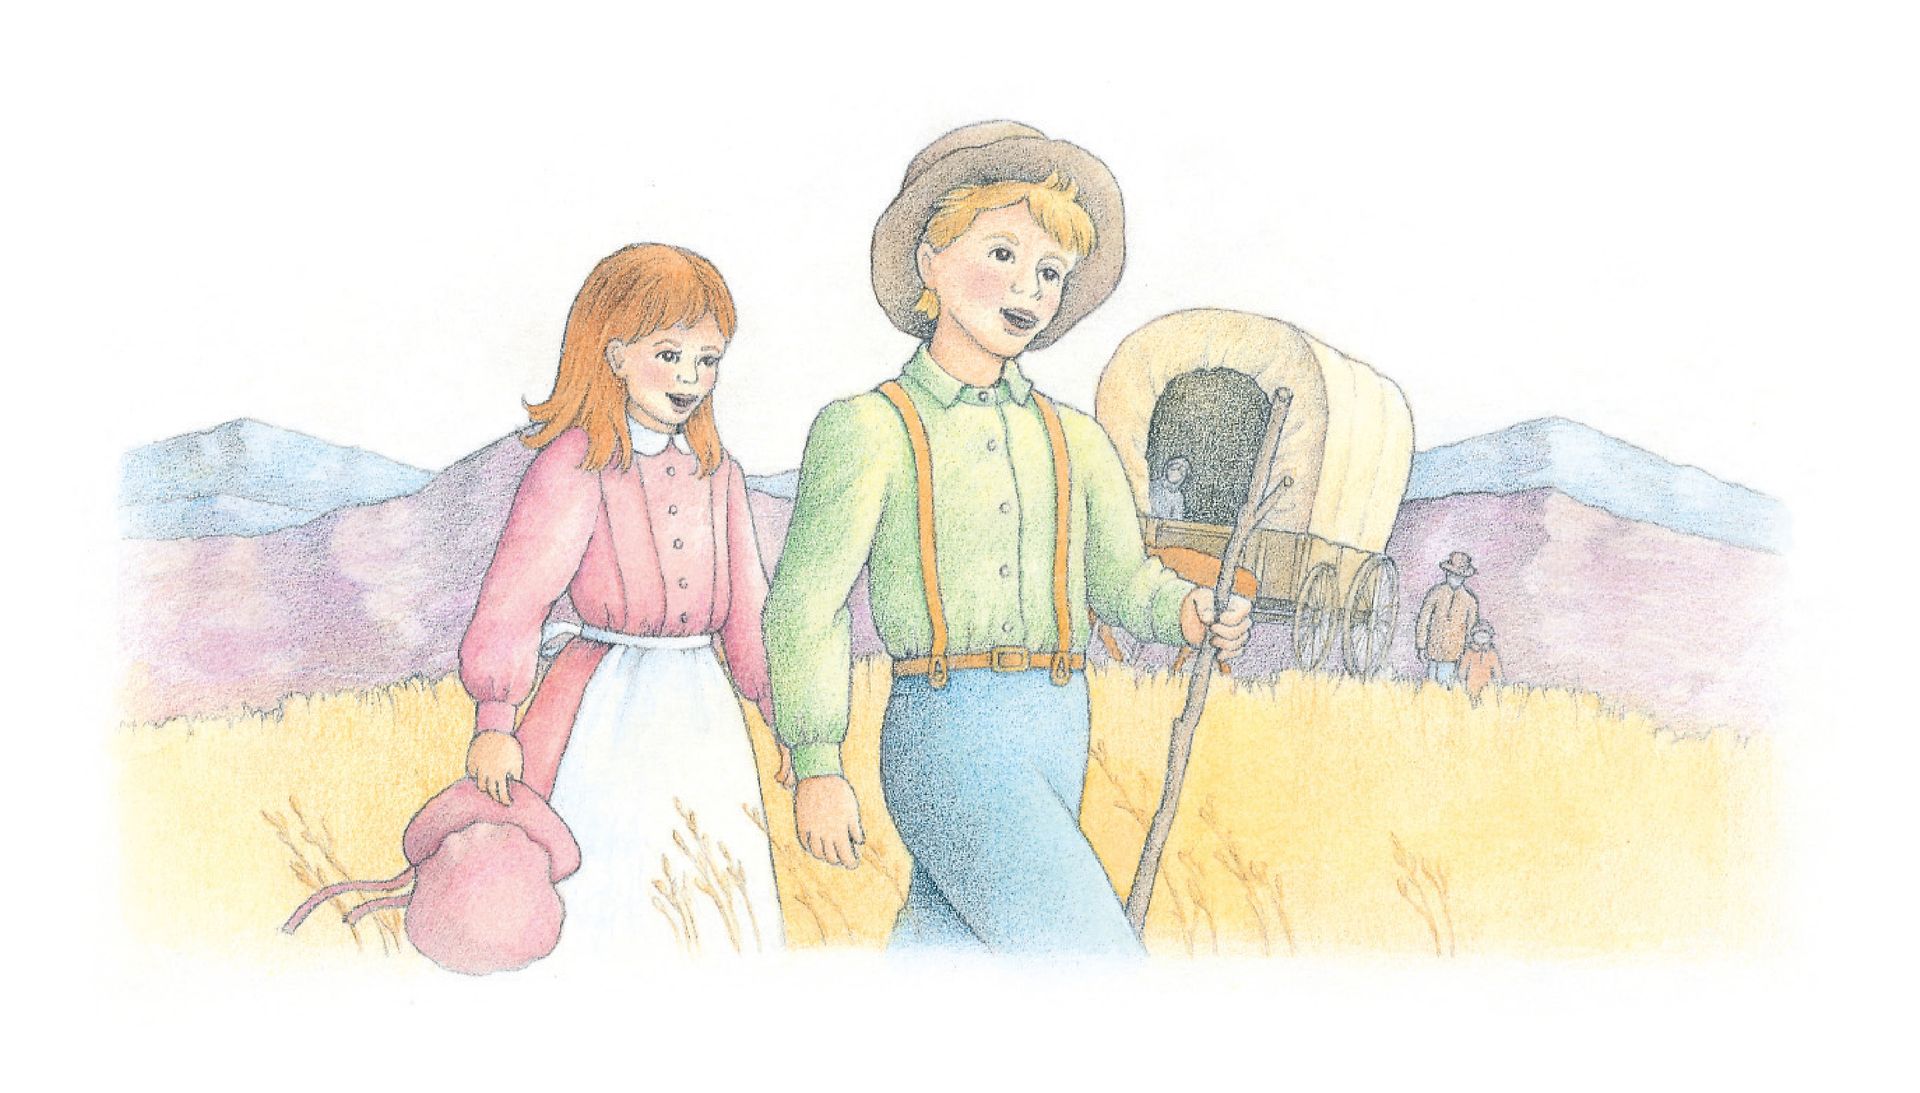 Two pioneer children walking and singing. From the Children’s Songbook, page 214, “Pioneer Children Sang as They Walked”; watercolor illustration by Beth Whittaker.